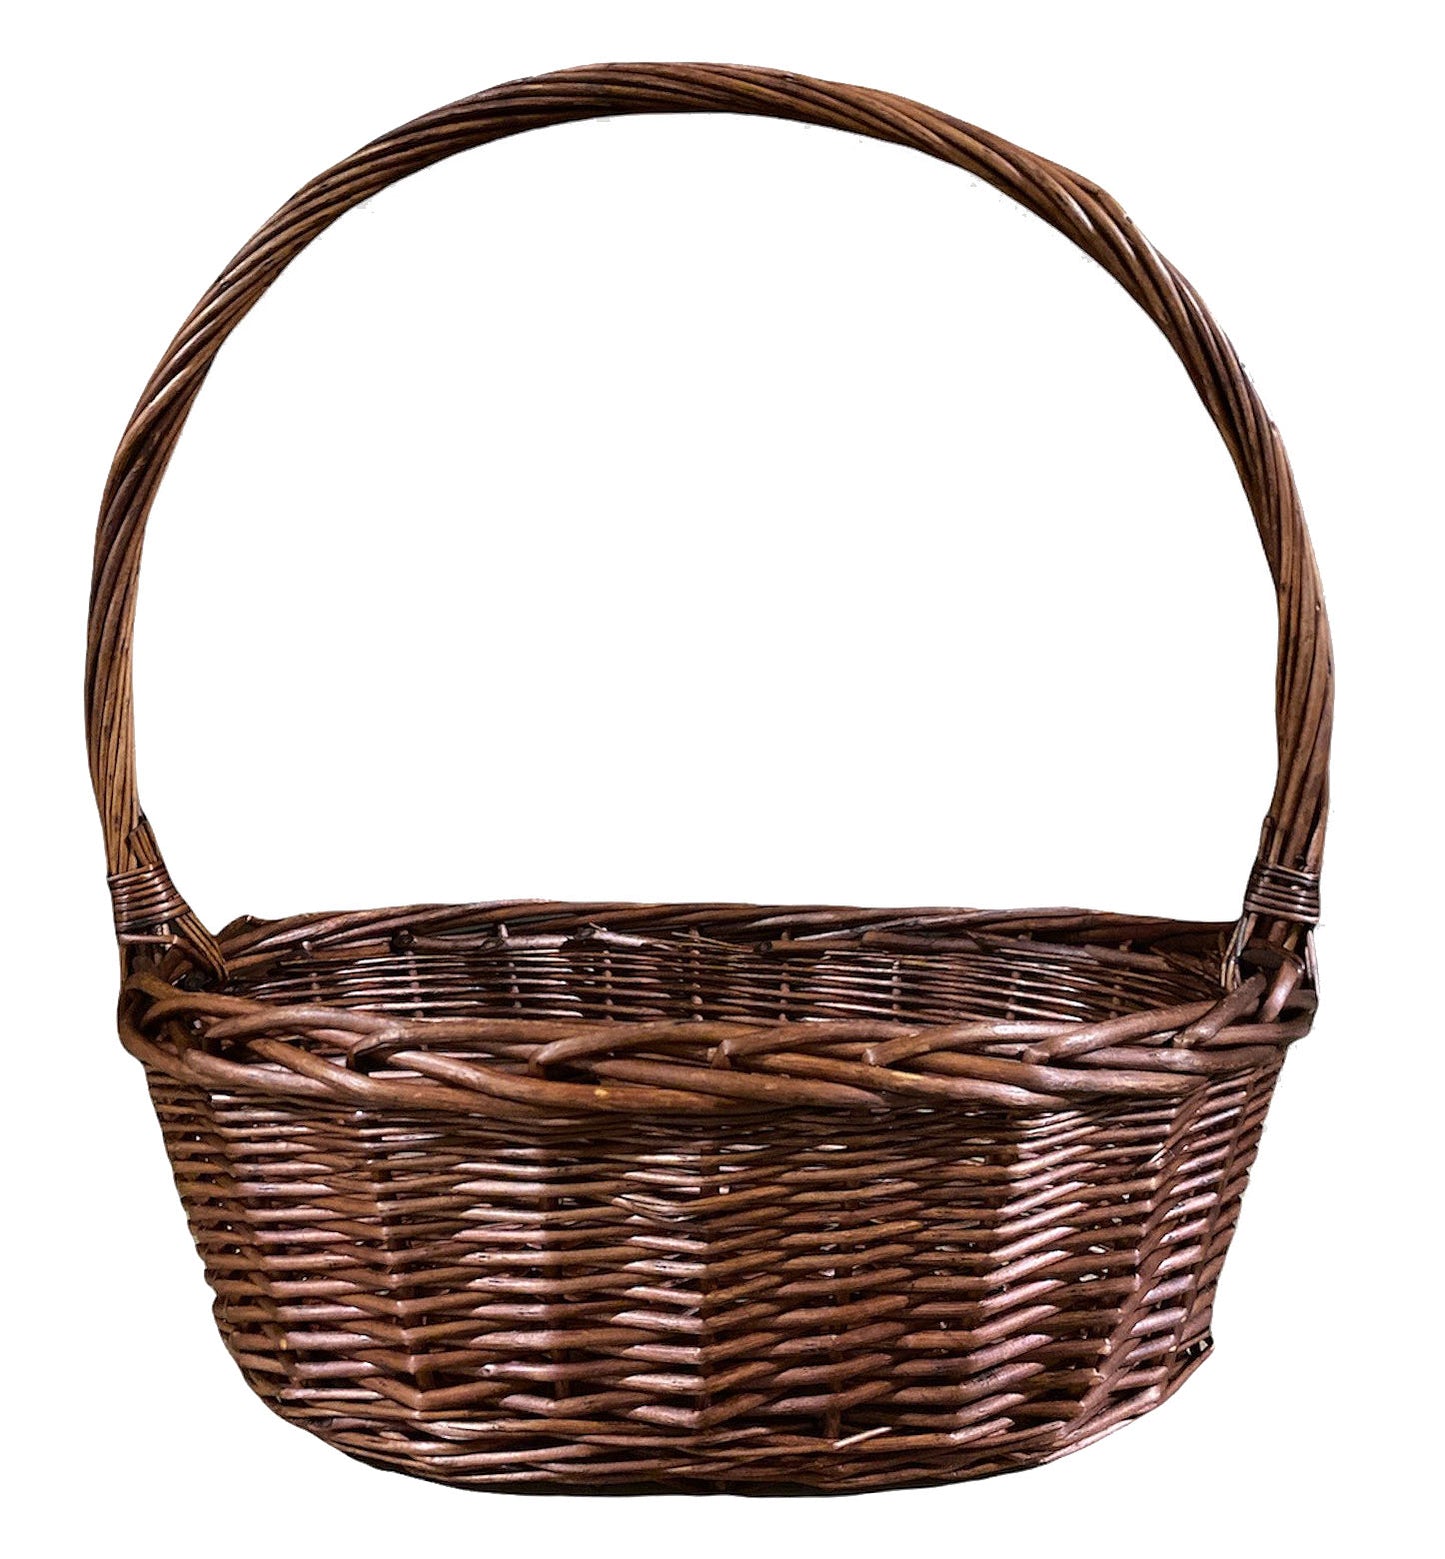 WILLOW OVAL BASKET STAINED 19x16x7x21 HH